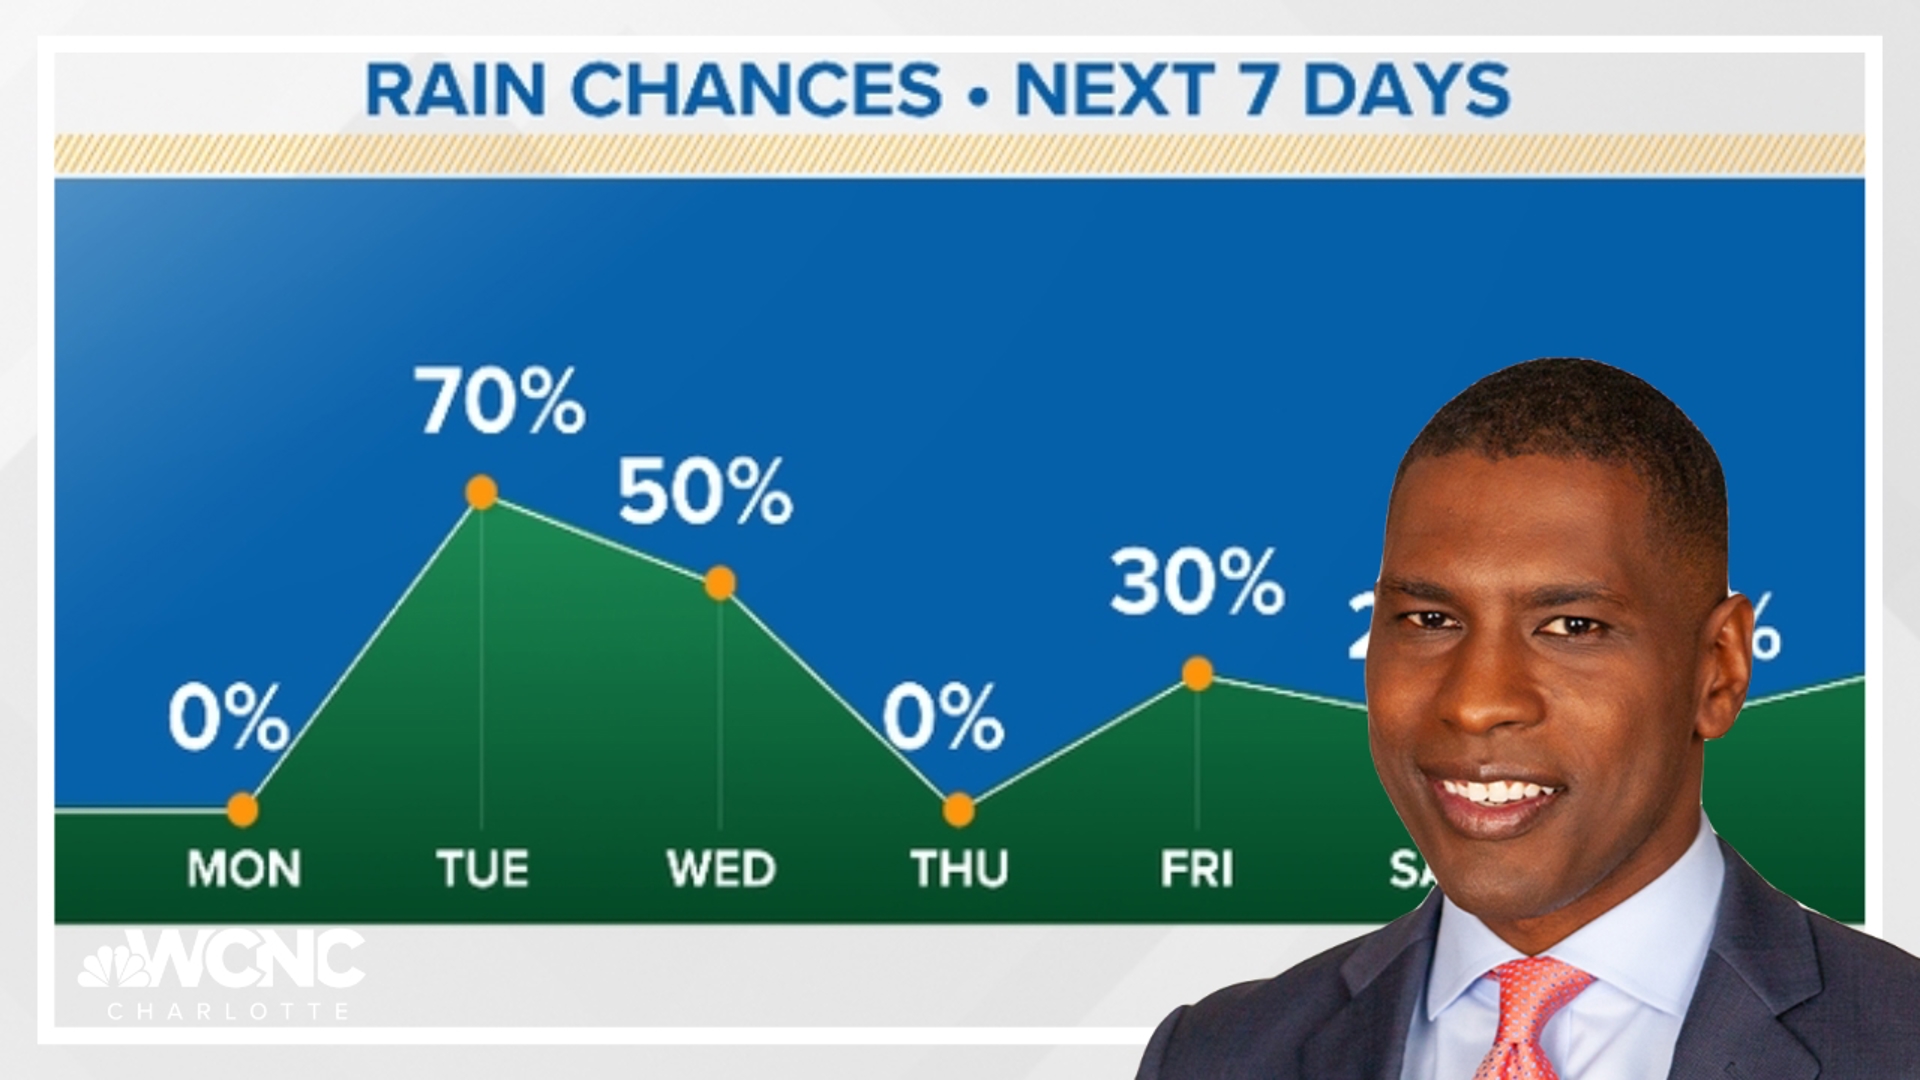 Get ready for a brand new week, yet the weather pattern remains unsettled like last week.